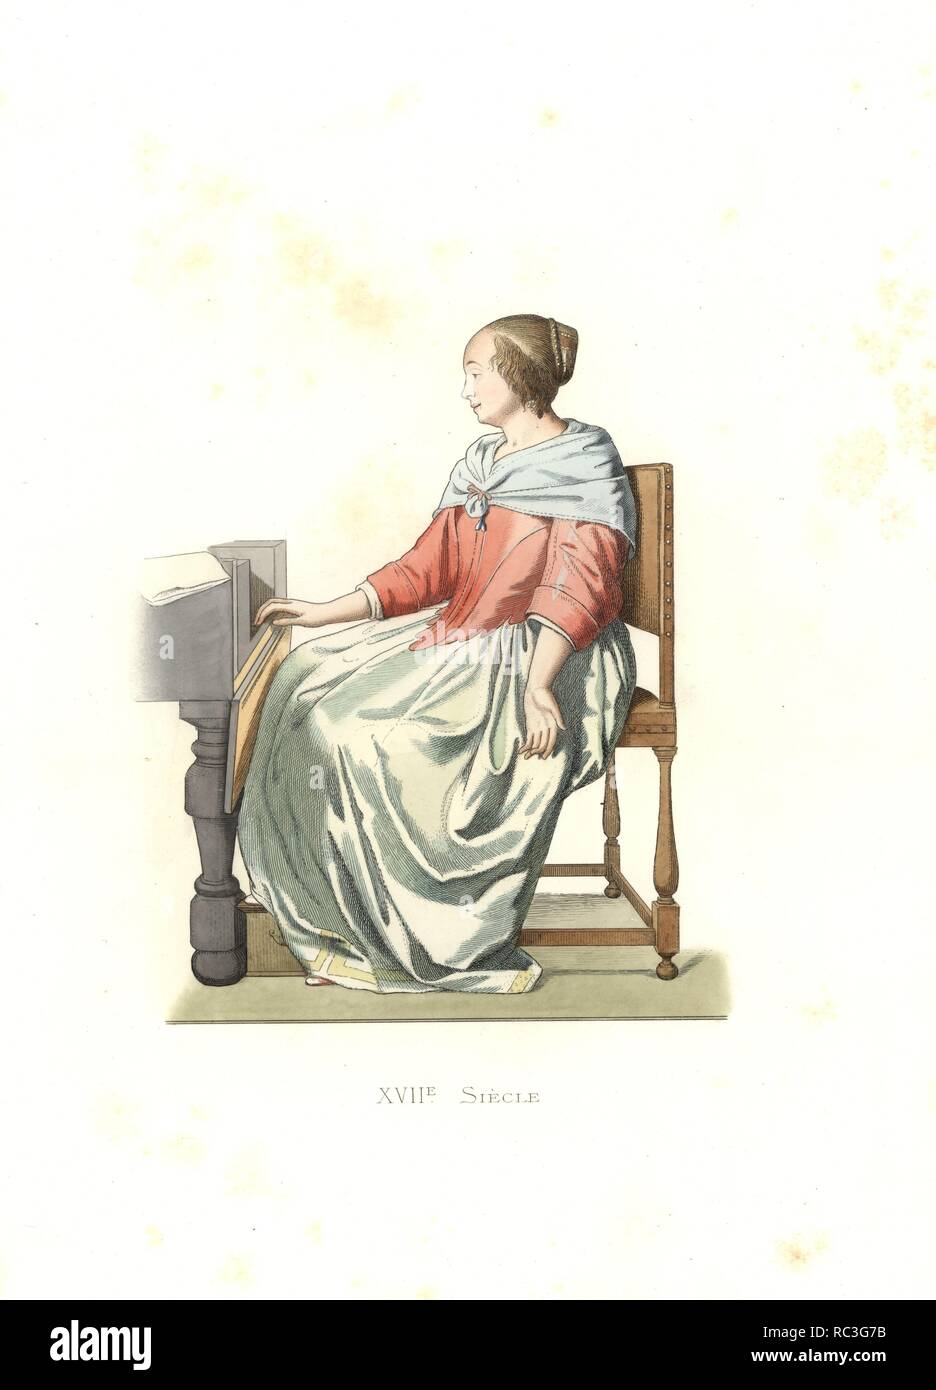 Woman of quality seated at a spinet, Holland, 17th century. From a painting by Gabriel Metzu in the Louvre. Handcolored illustration by E. Lechevallier-Chevignard, lithographed by A. Didier, L. Flameng, F. Laguillermie, from Georges Duplessis's 'Costumes historiques des XVIe, XVIIe et XVIIIe siecles' (Historical costumes of the 16th, 17th and 18th centuries), Paris 1867. The book was a continuation of the series on the costumes of the 12th to 15th centuries published by Camille Bonnard and Paul Mercuri from 1830. Georges Duplessis (1834-1899) was curator of the Prints department at the Bibliot Stock Photo